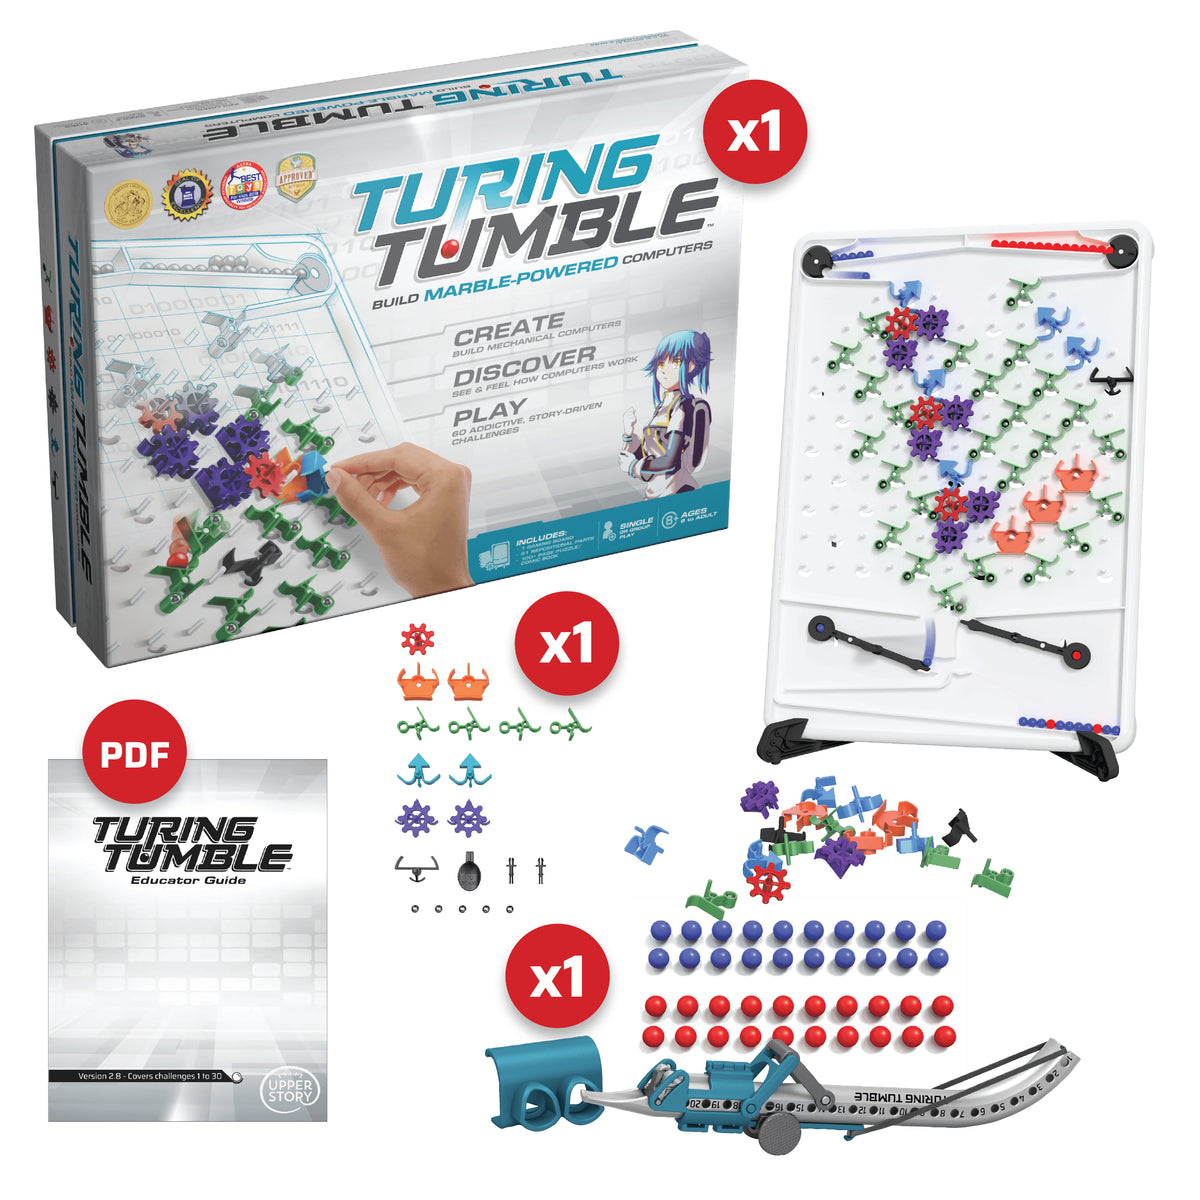 Case Study: Turing Tumble - Programming with Marbles